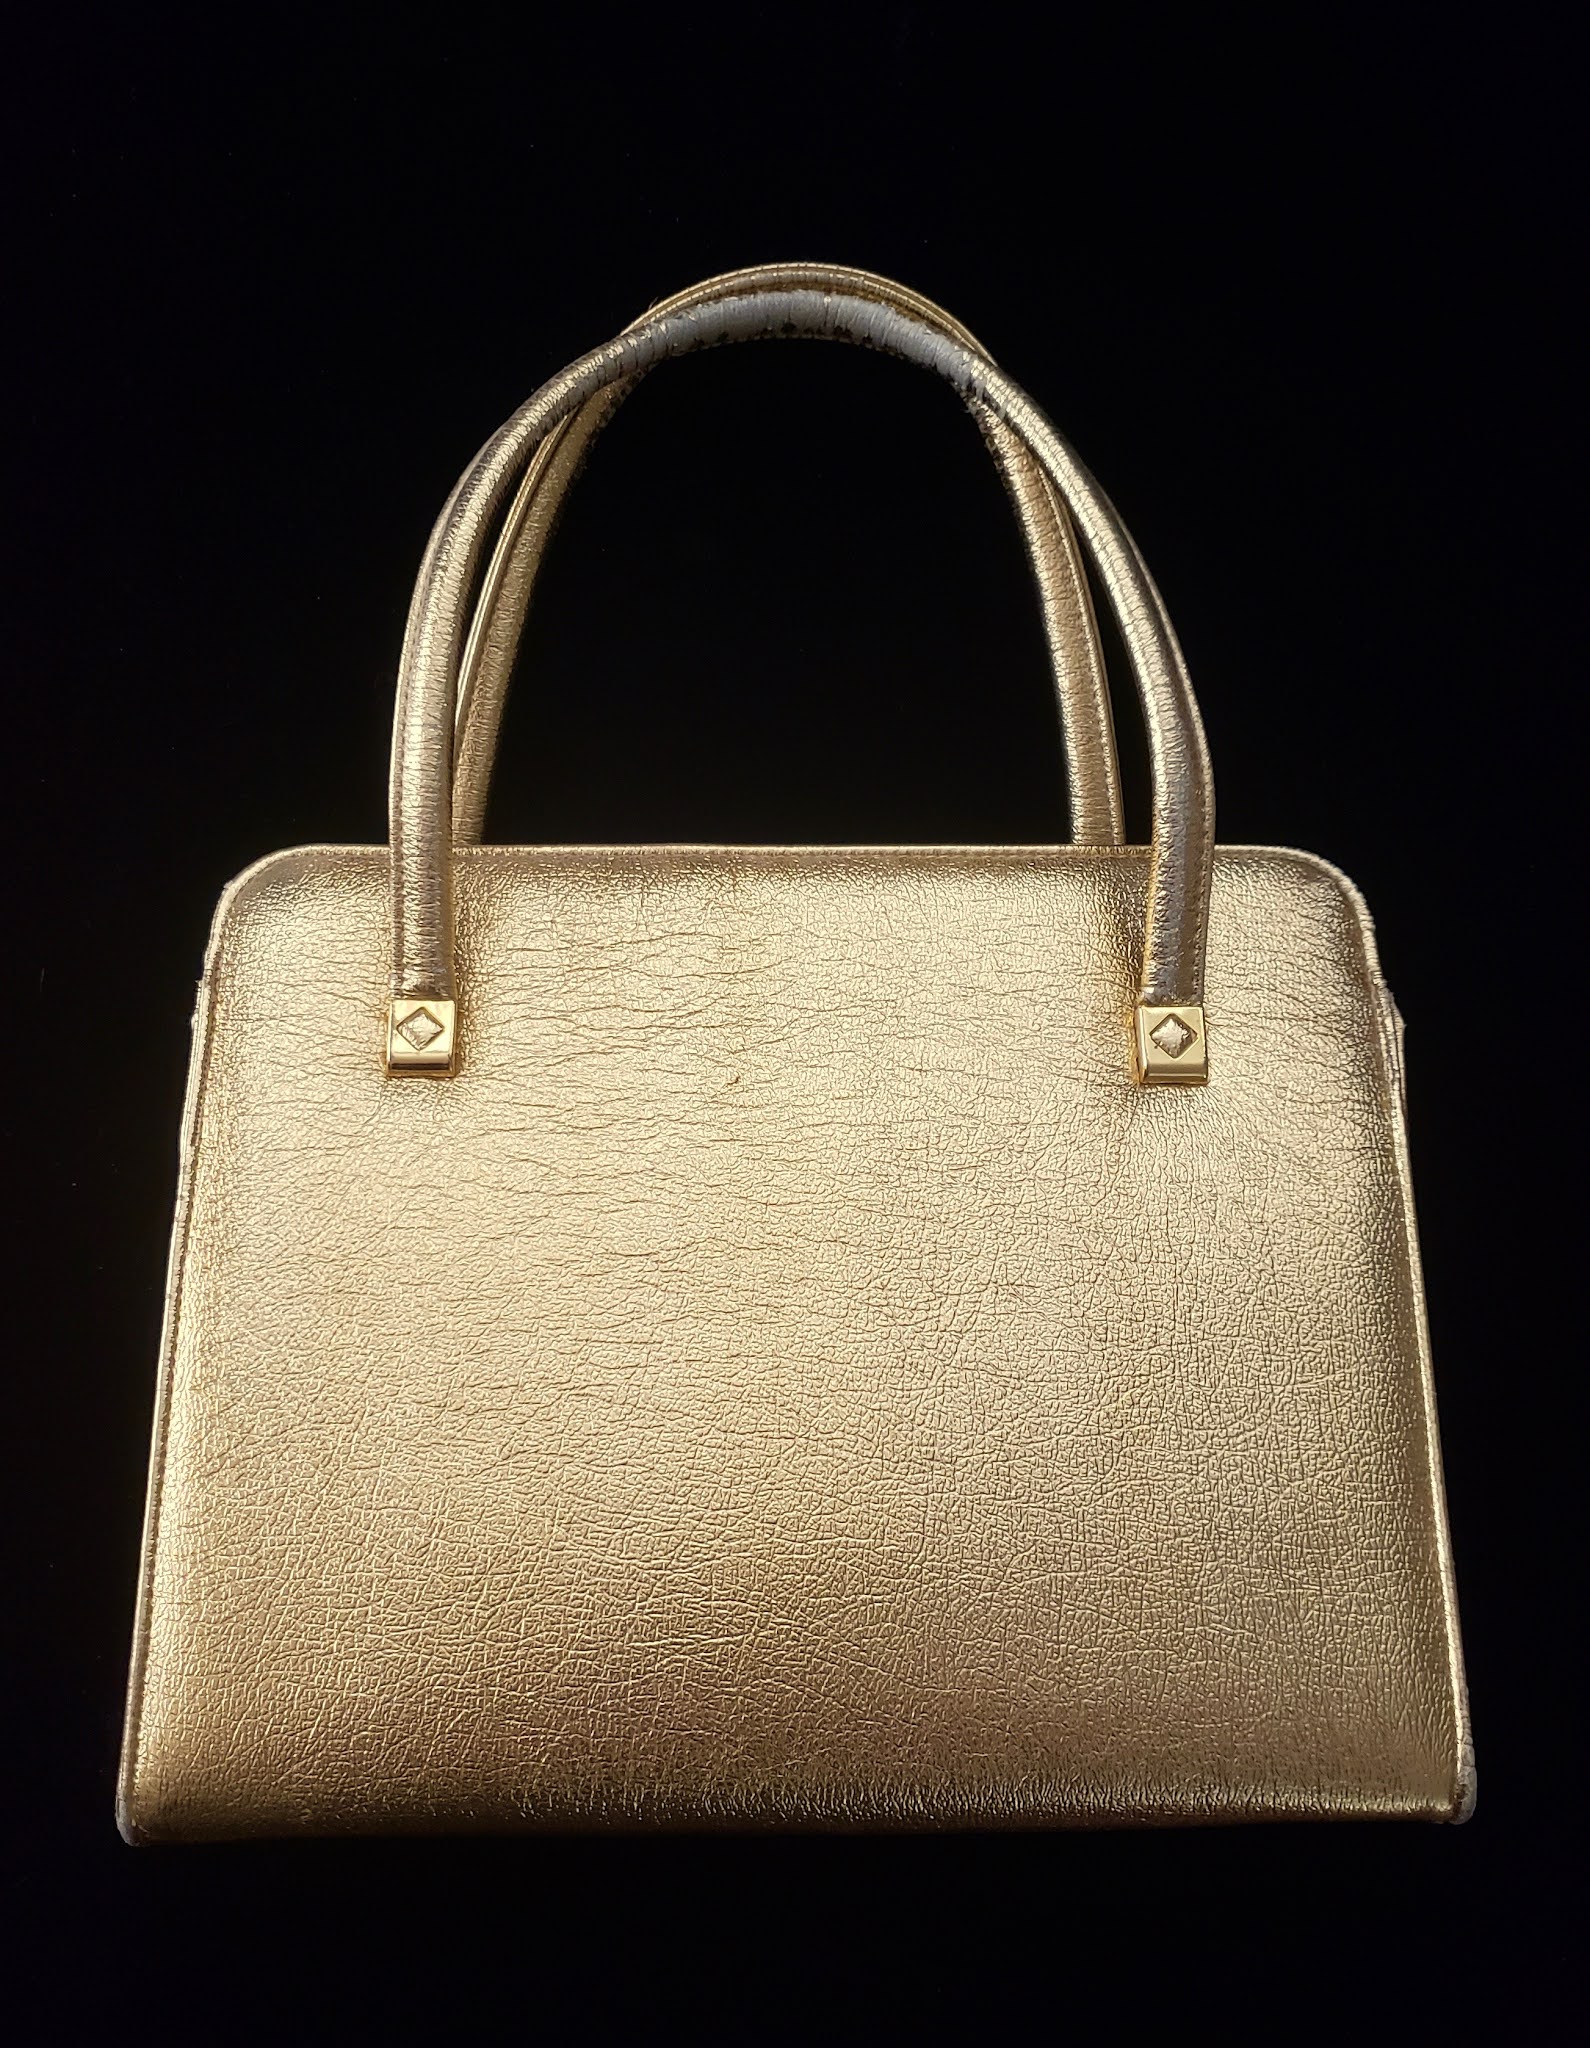 The Referral by New Vintage Handbags